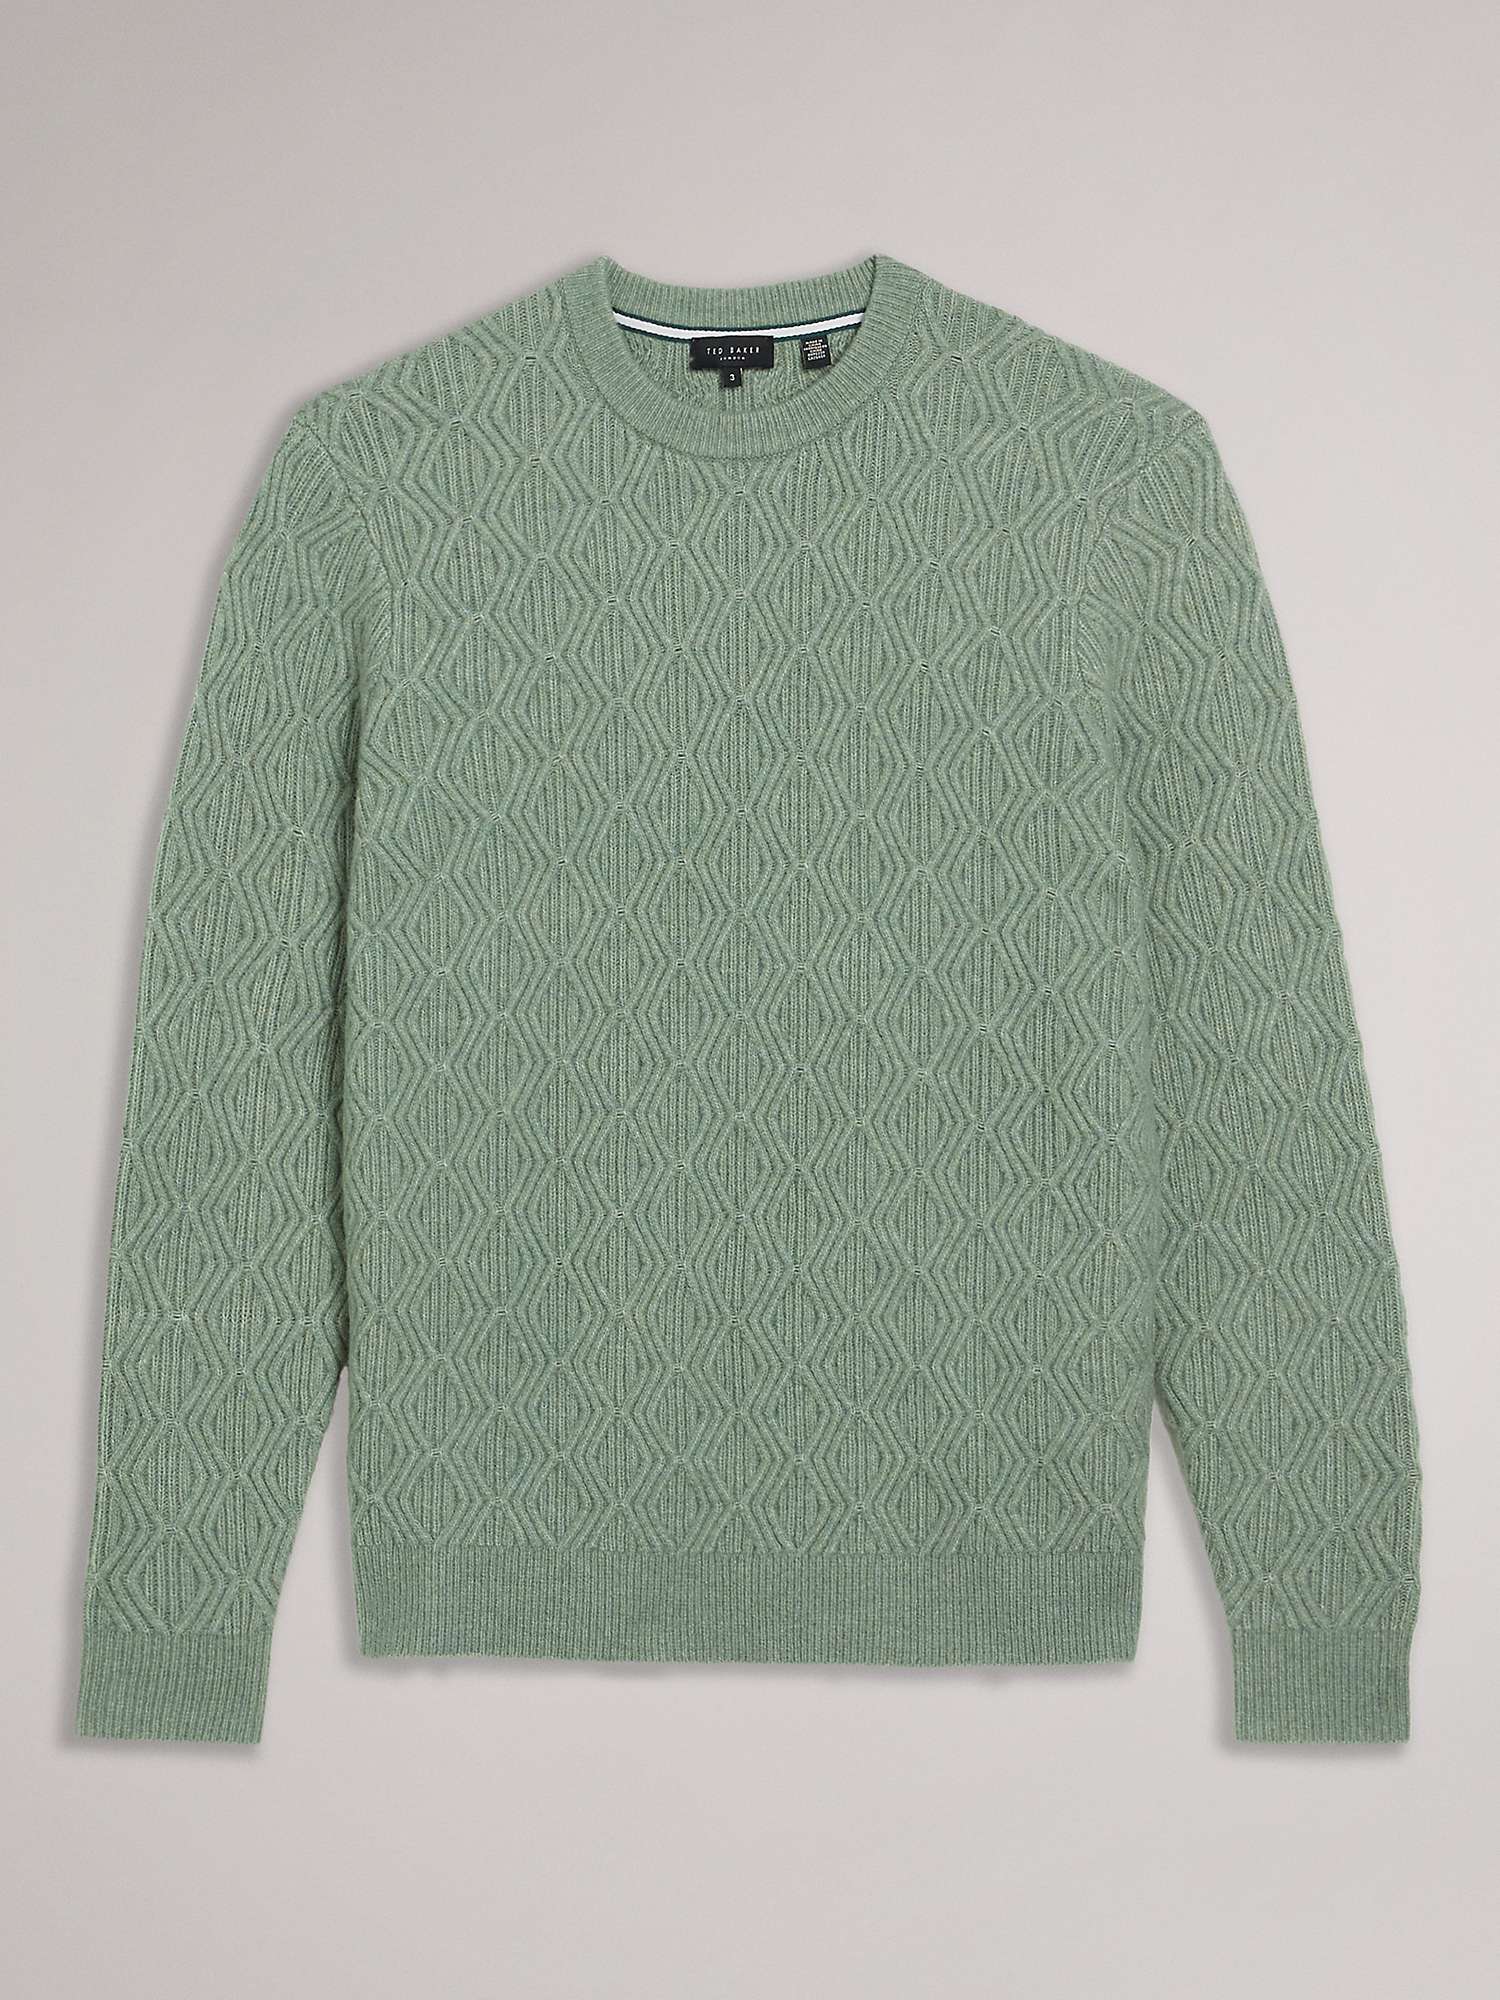 Buy Ted Baker Atchet Long Sleeve Textured Cable Crew Neck Jumper Online at johnlewis.com